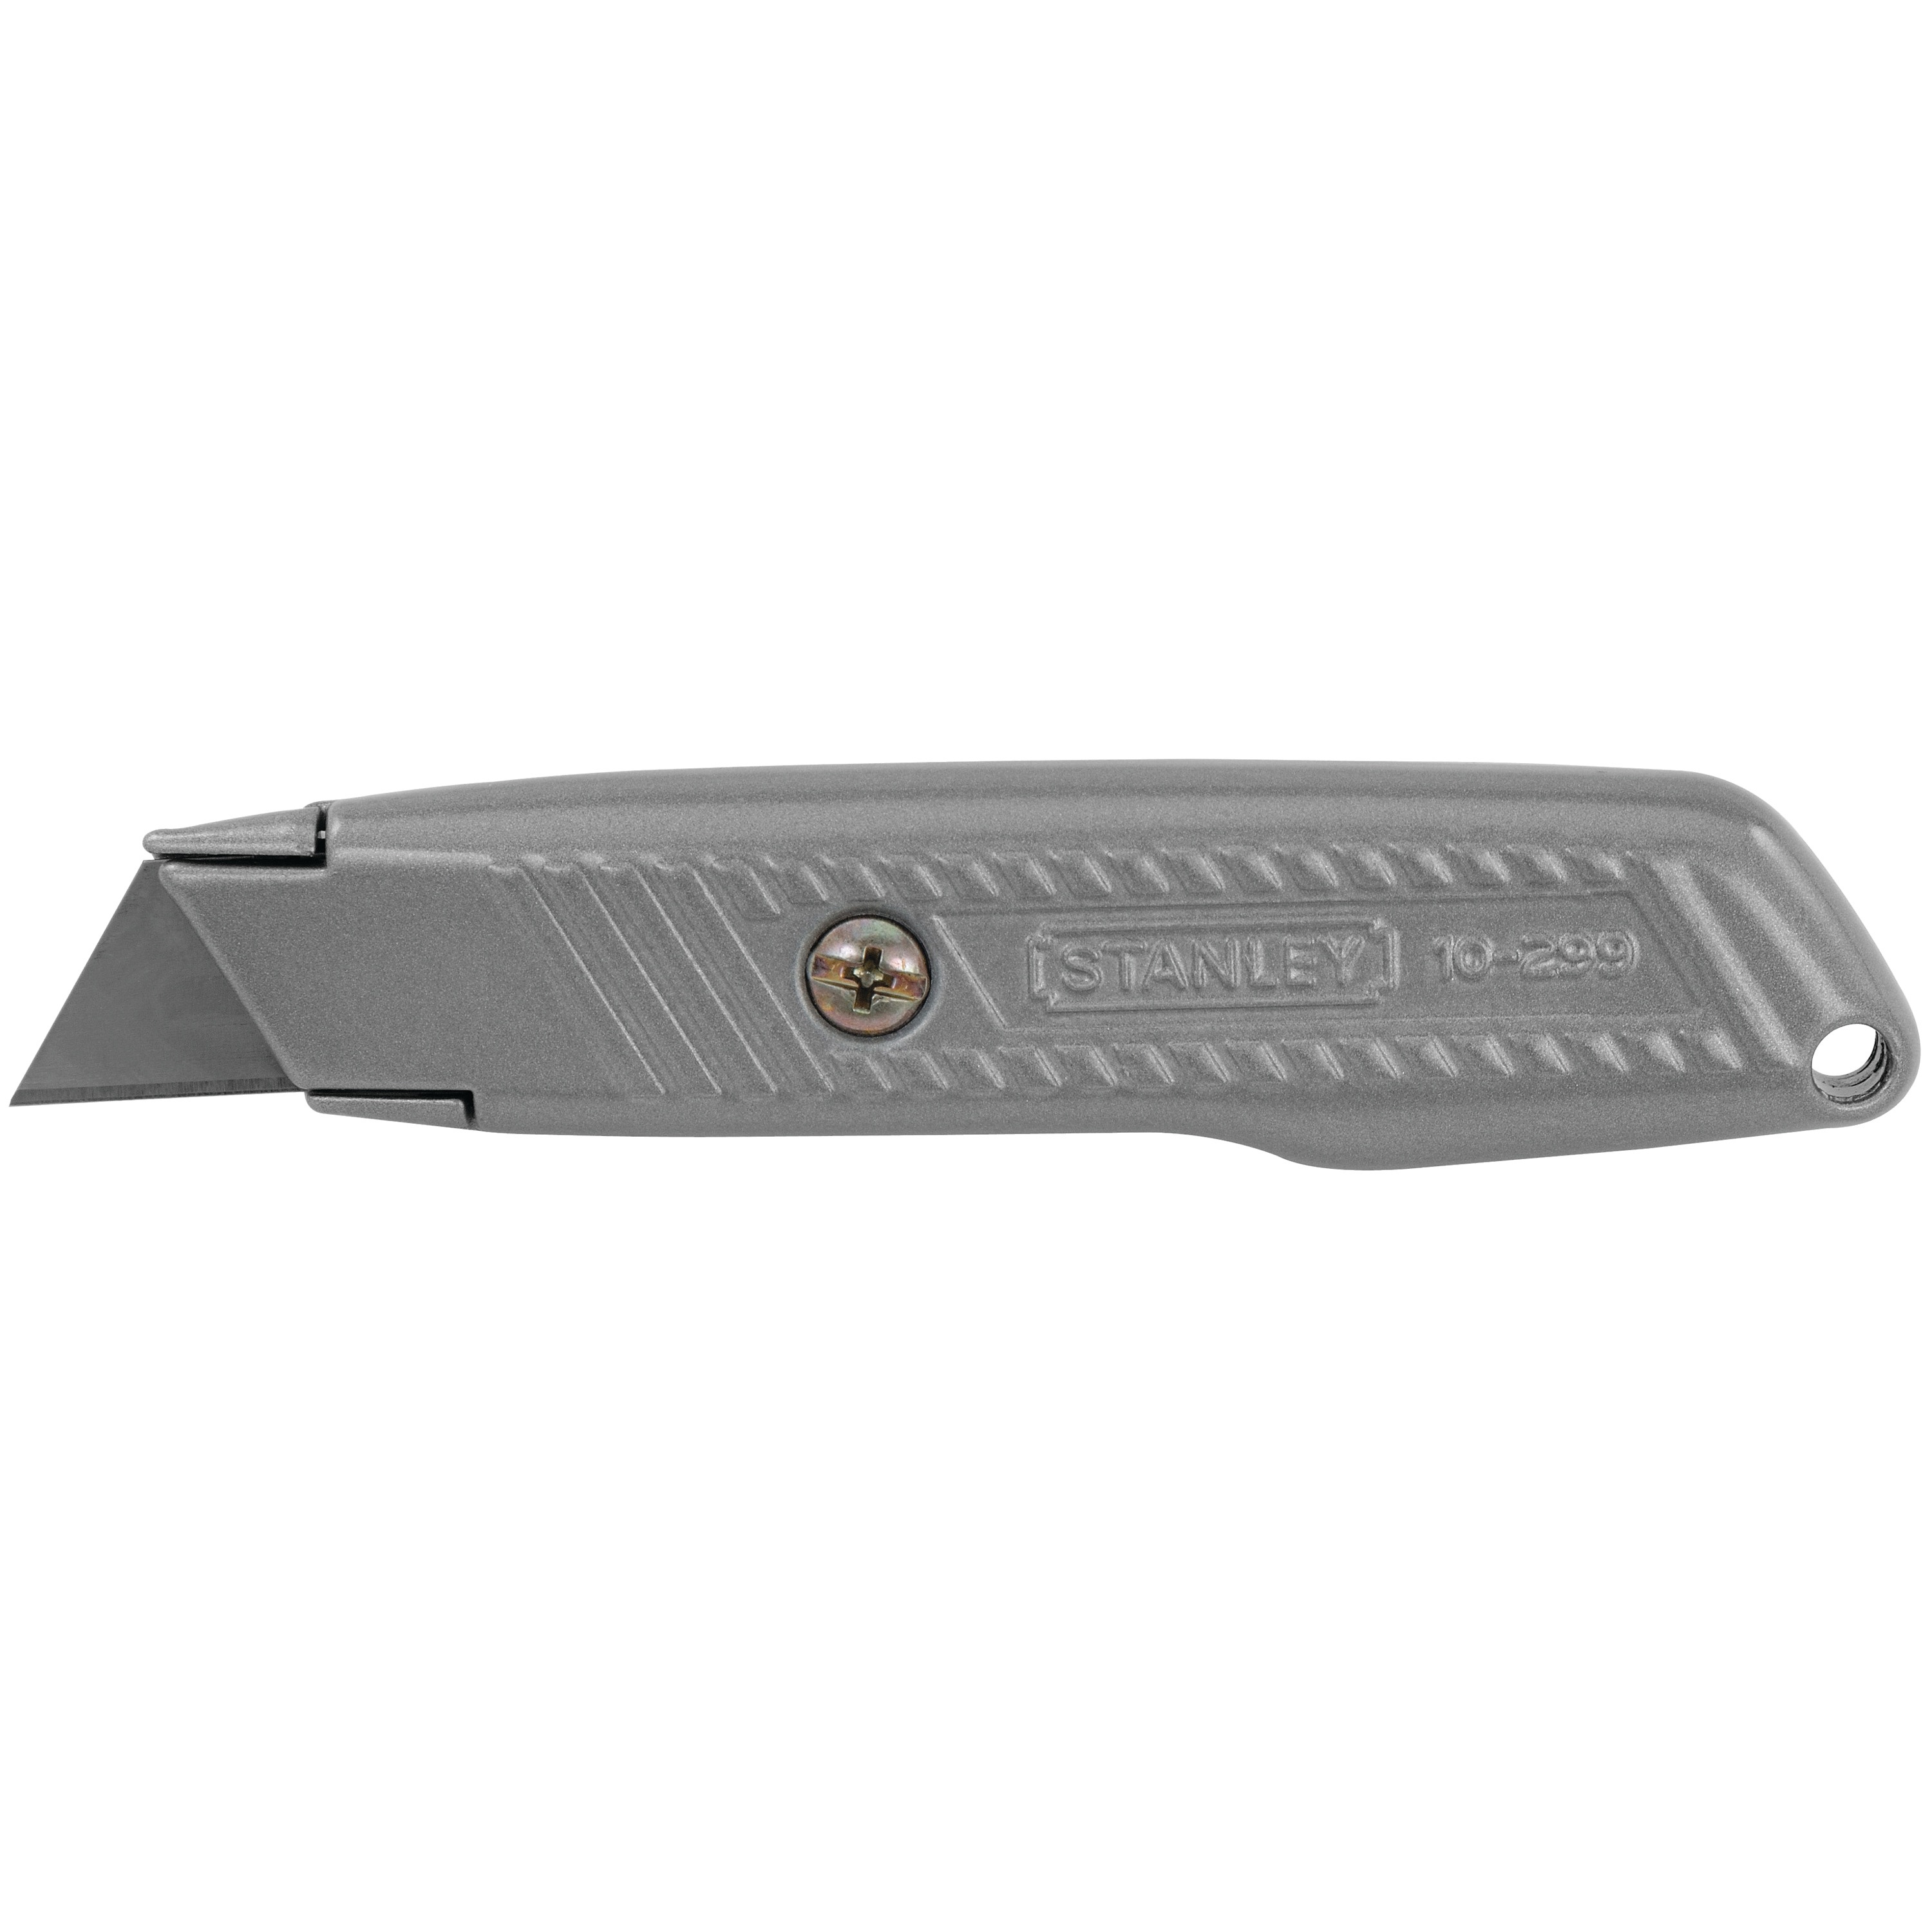 Stanley Tools - 512 in Fixed Blade Interlock Utility Knife - 10-299